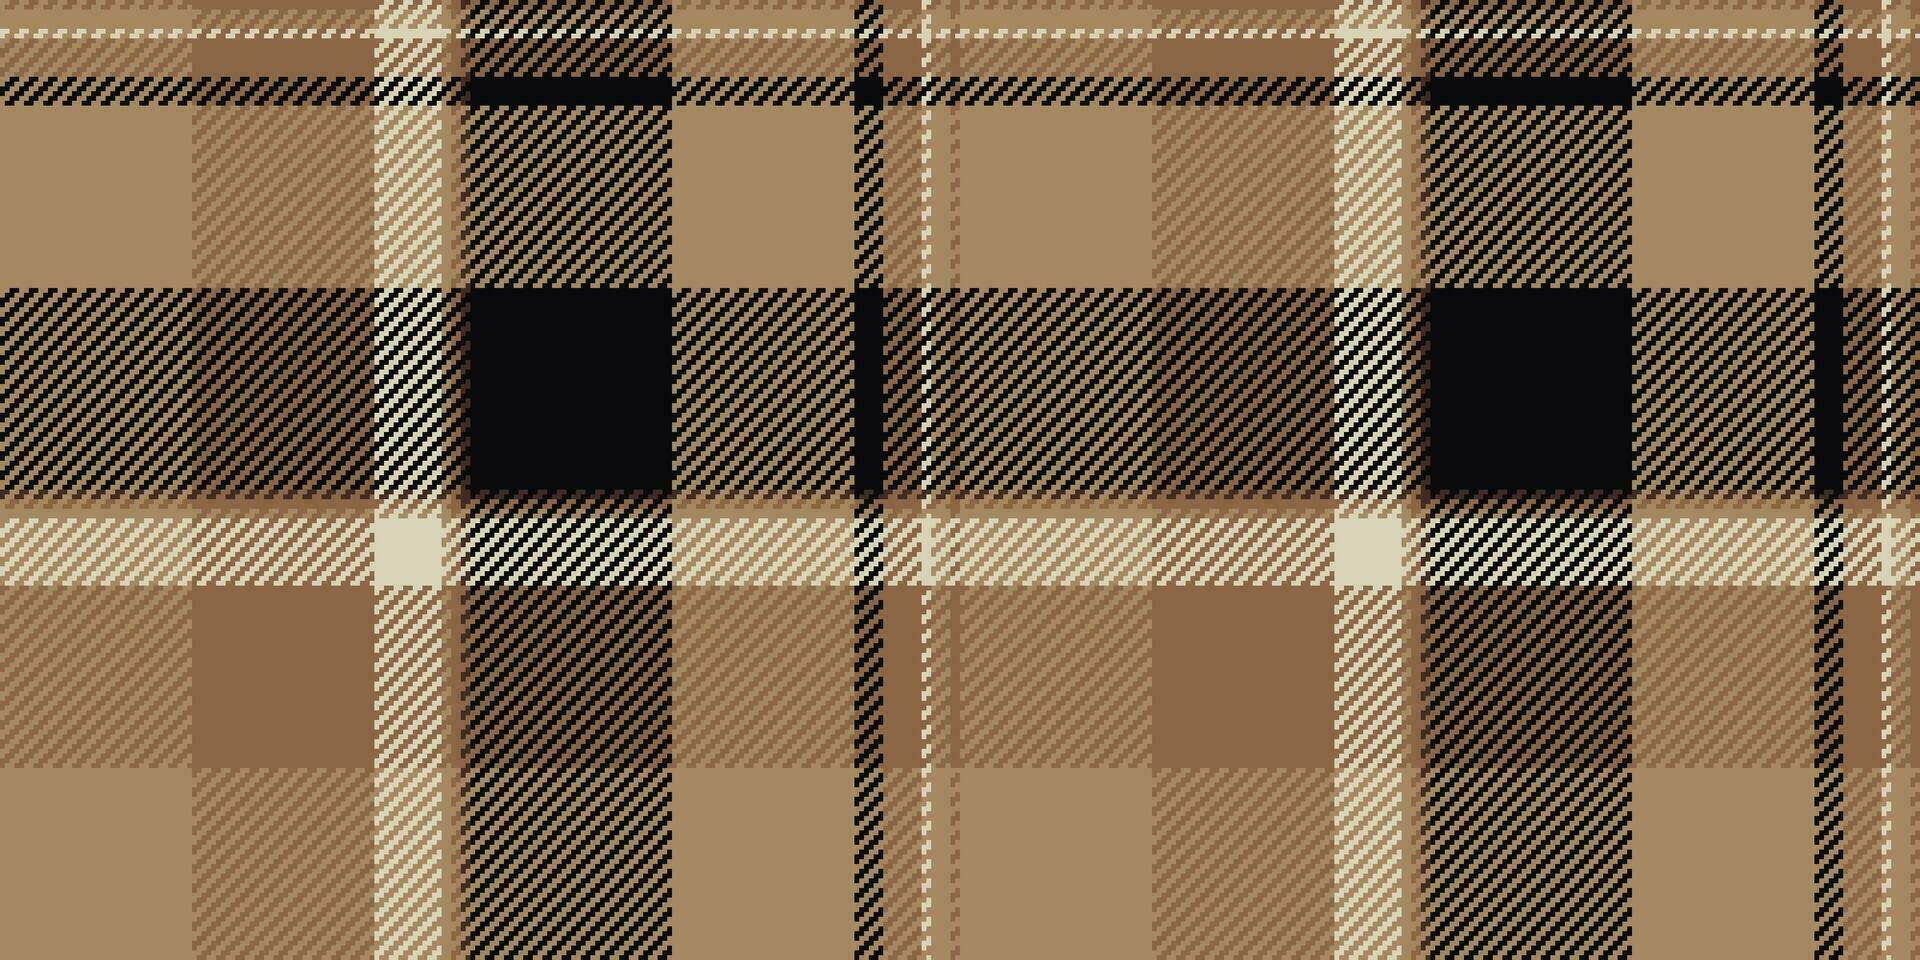 Designs seamless pattern textile, perfect vector tartan plaid. Messy check texture background fabric in orange and black colors.